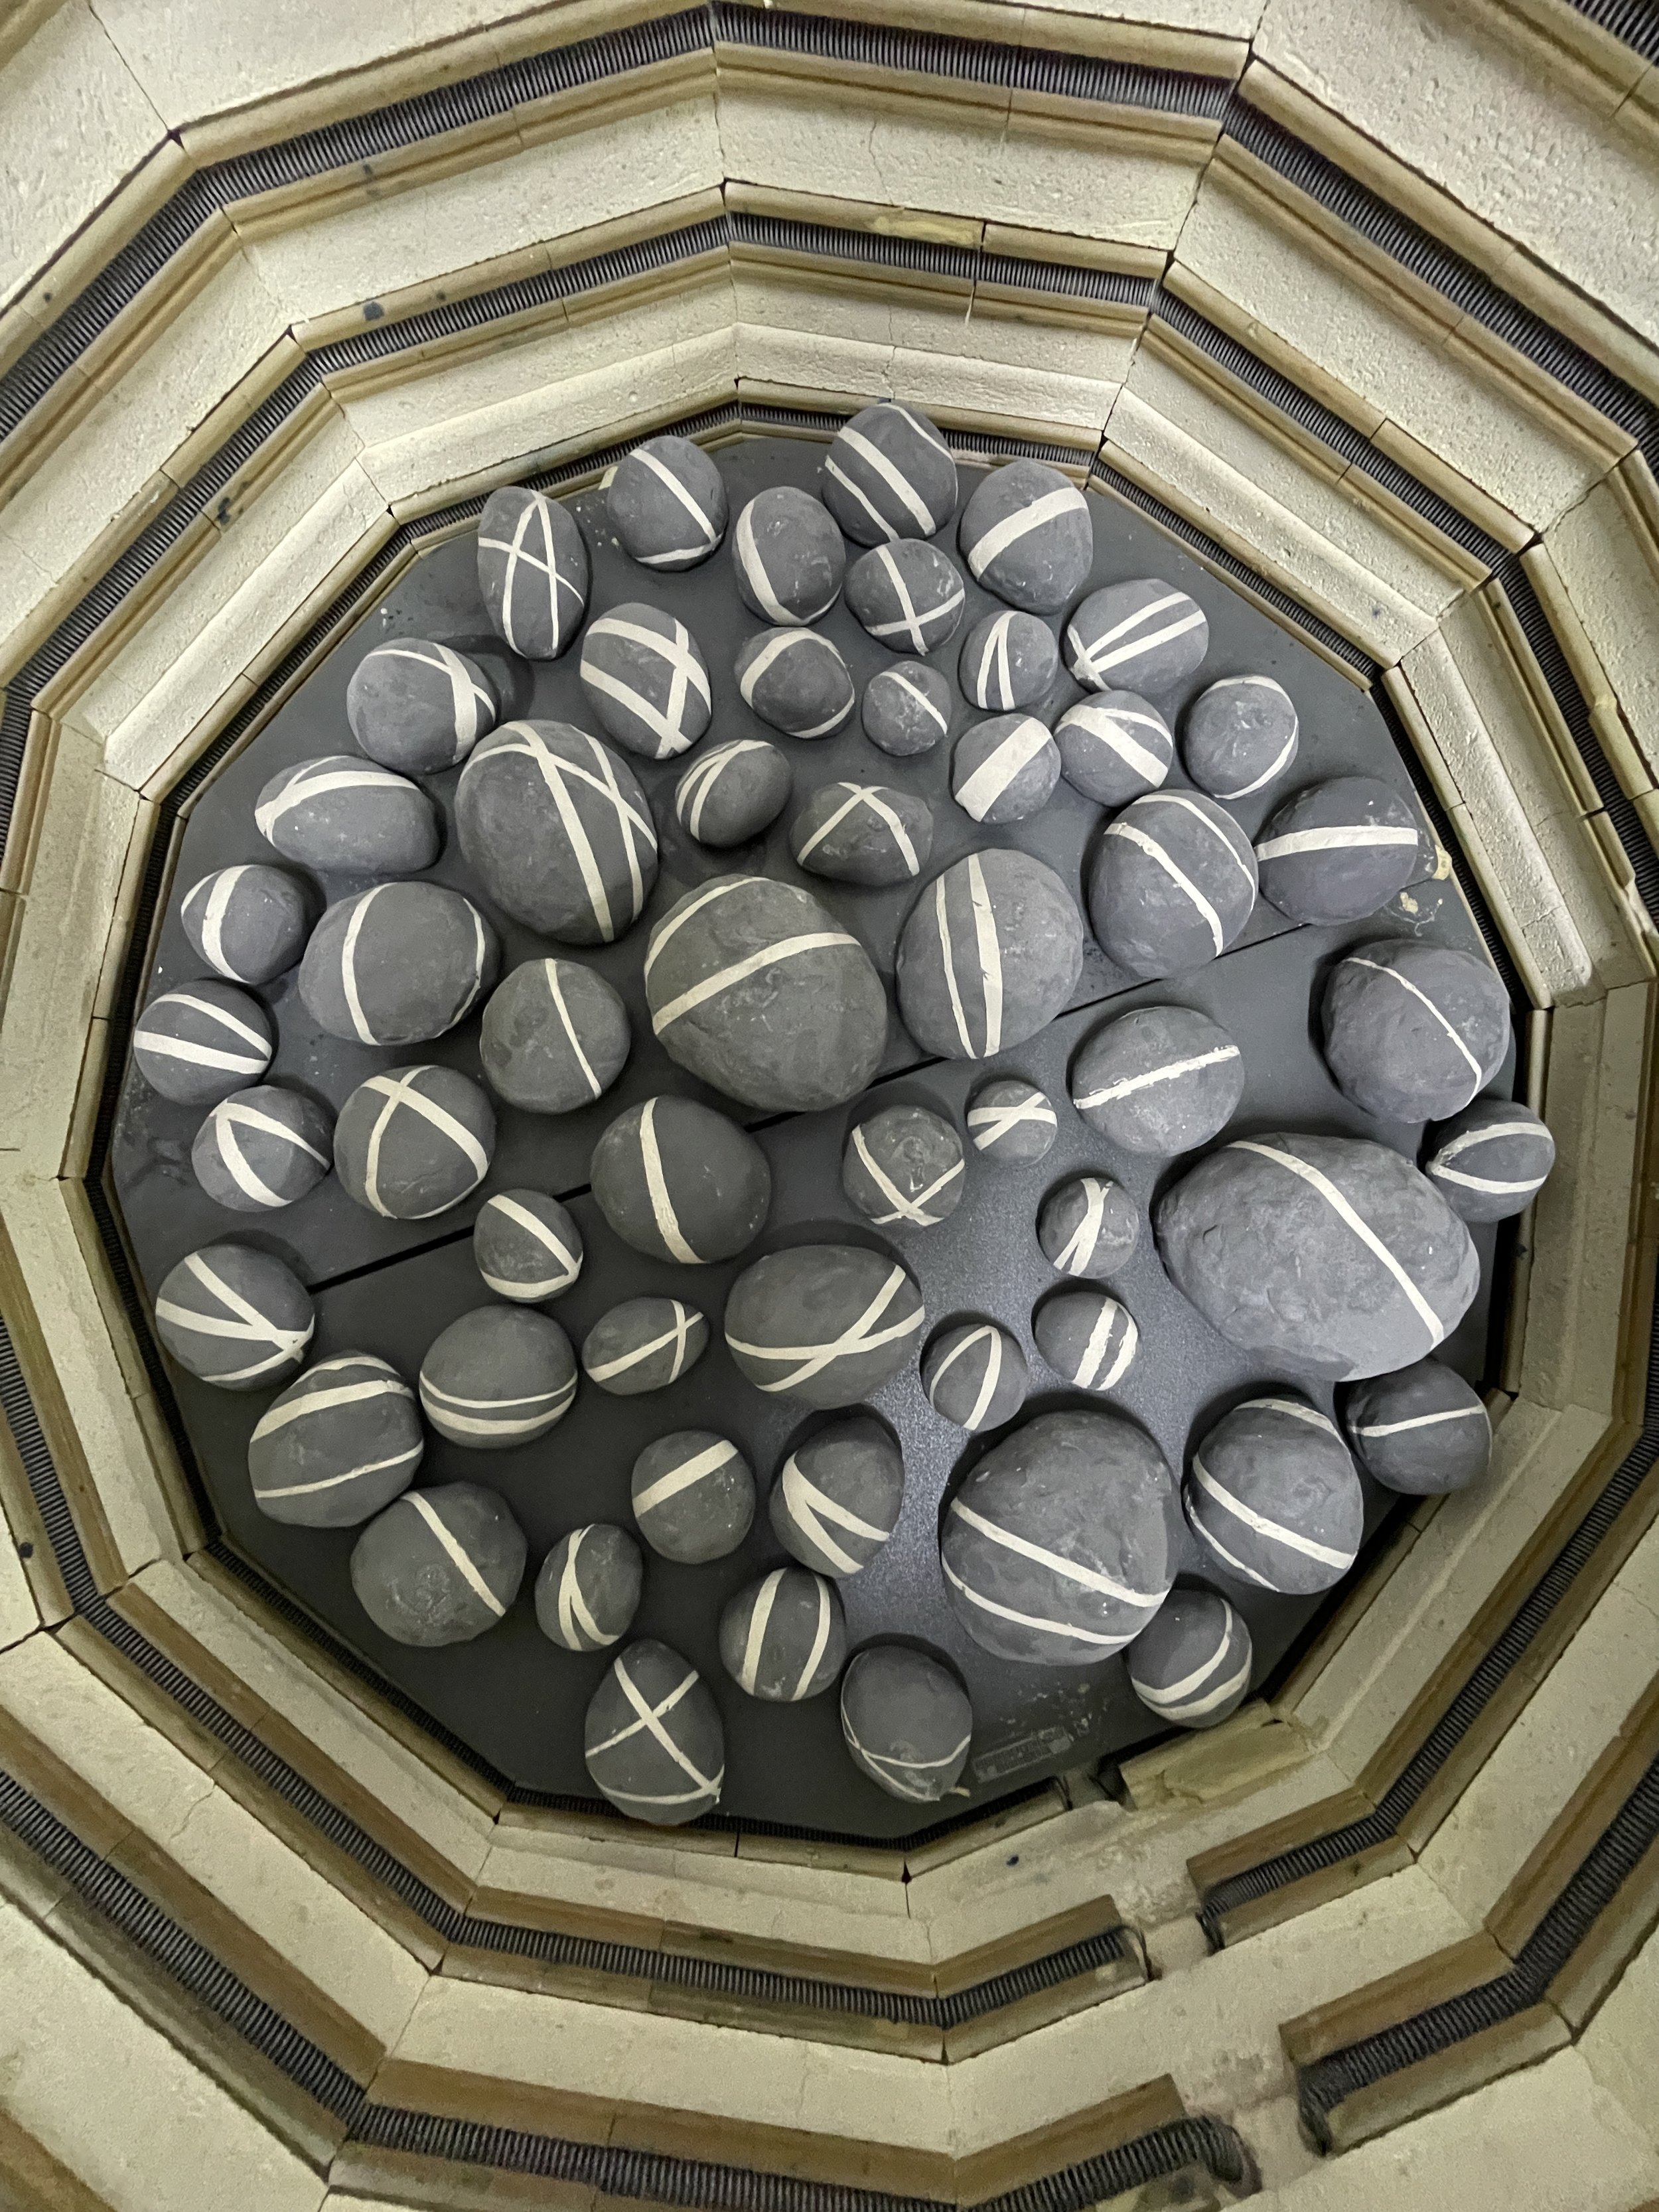  An image of black rocks with white lines through them portrayed as artwork created by Lauren HB Studio available for public and private display 